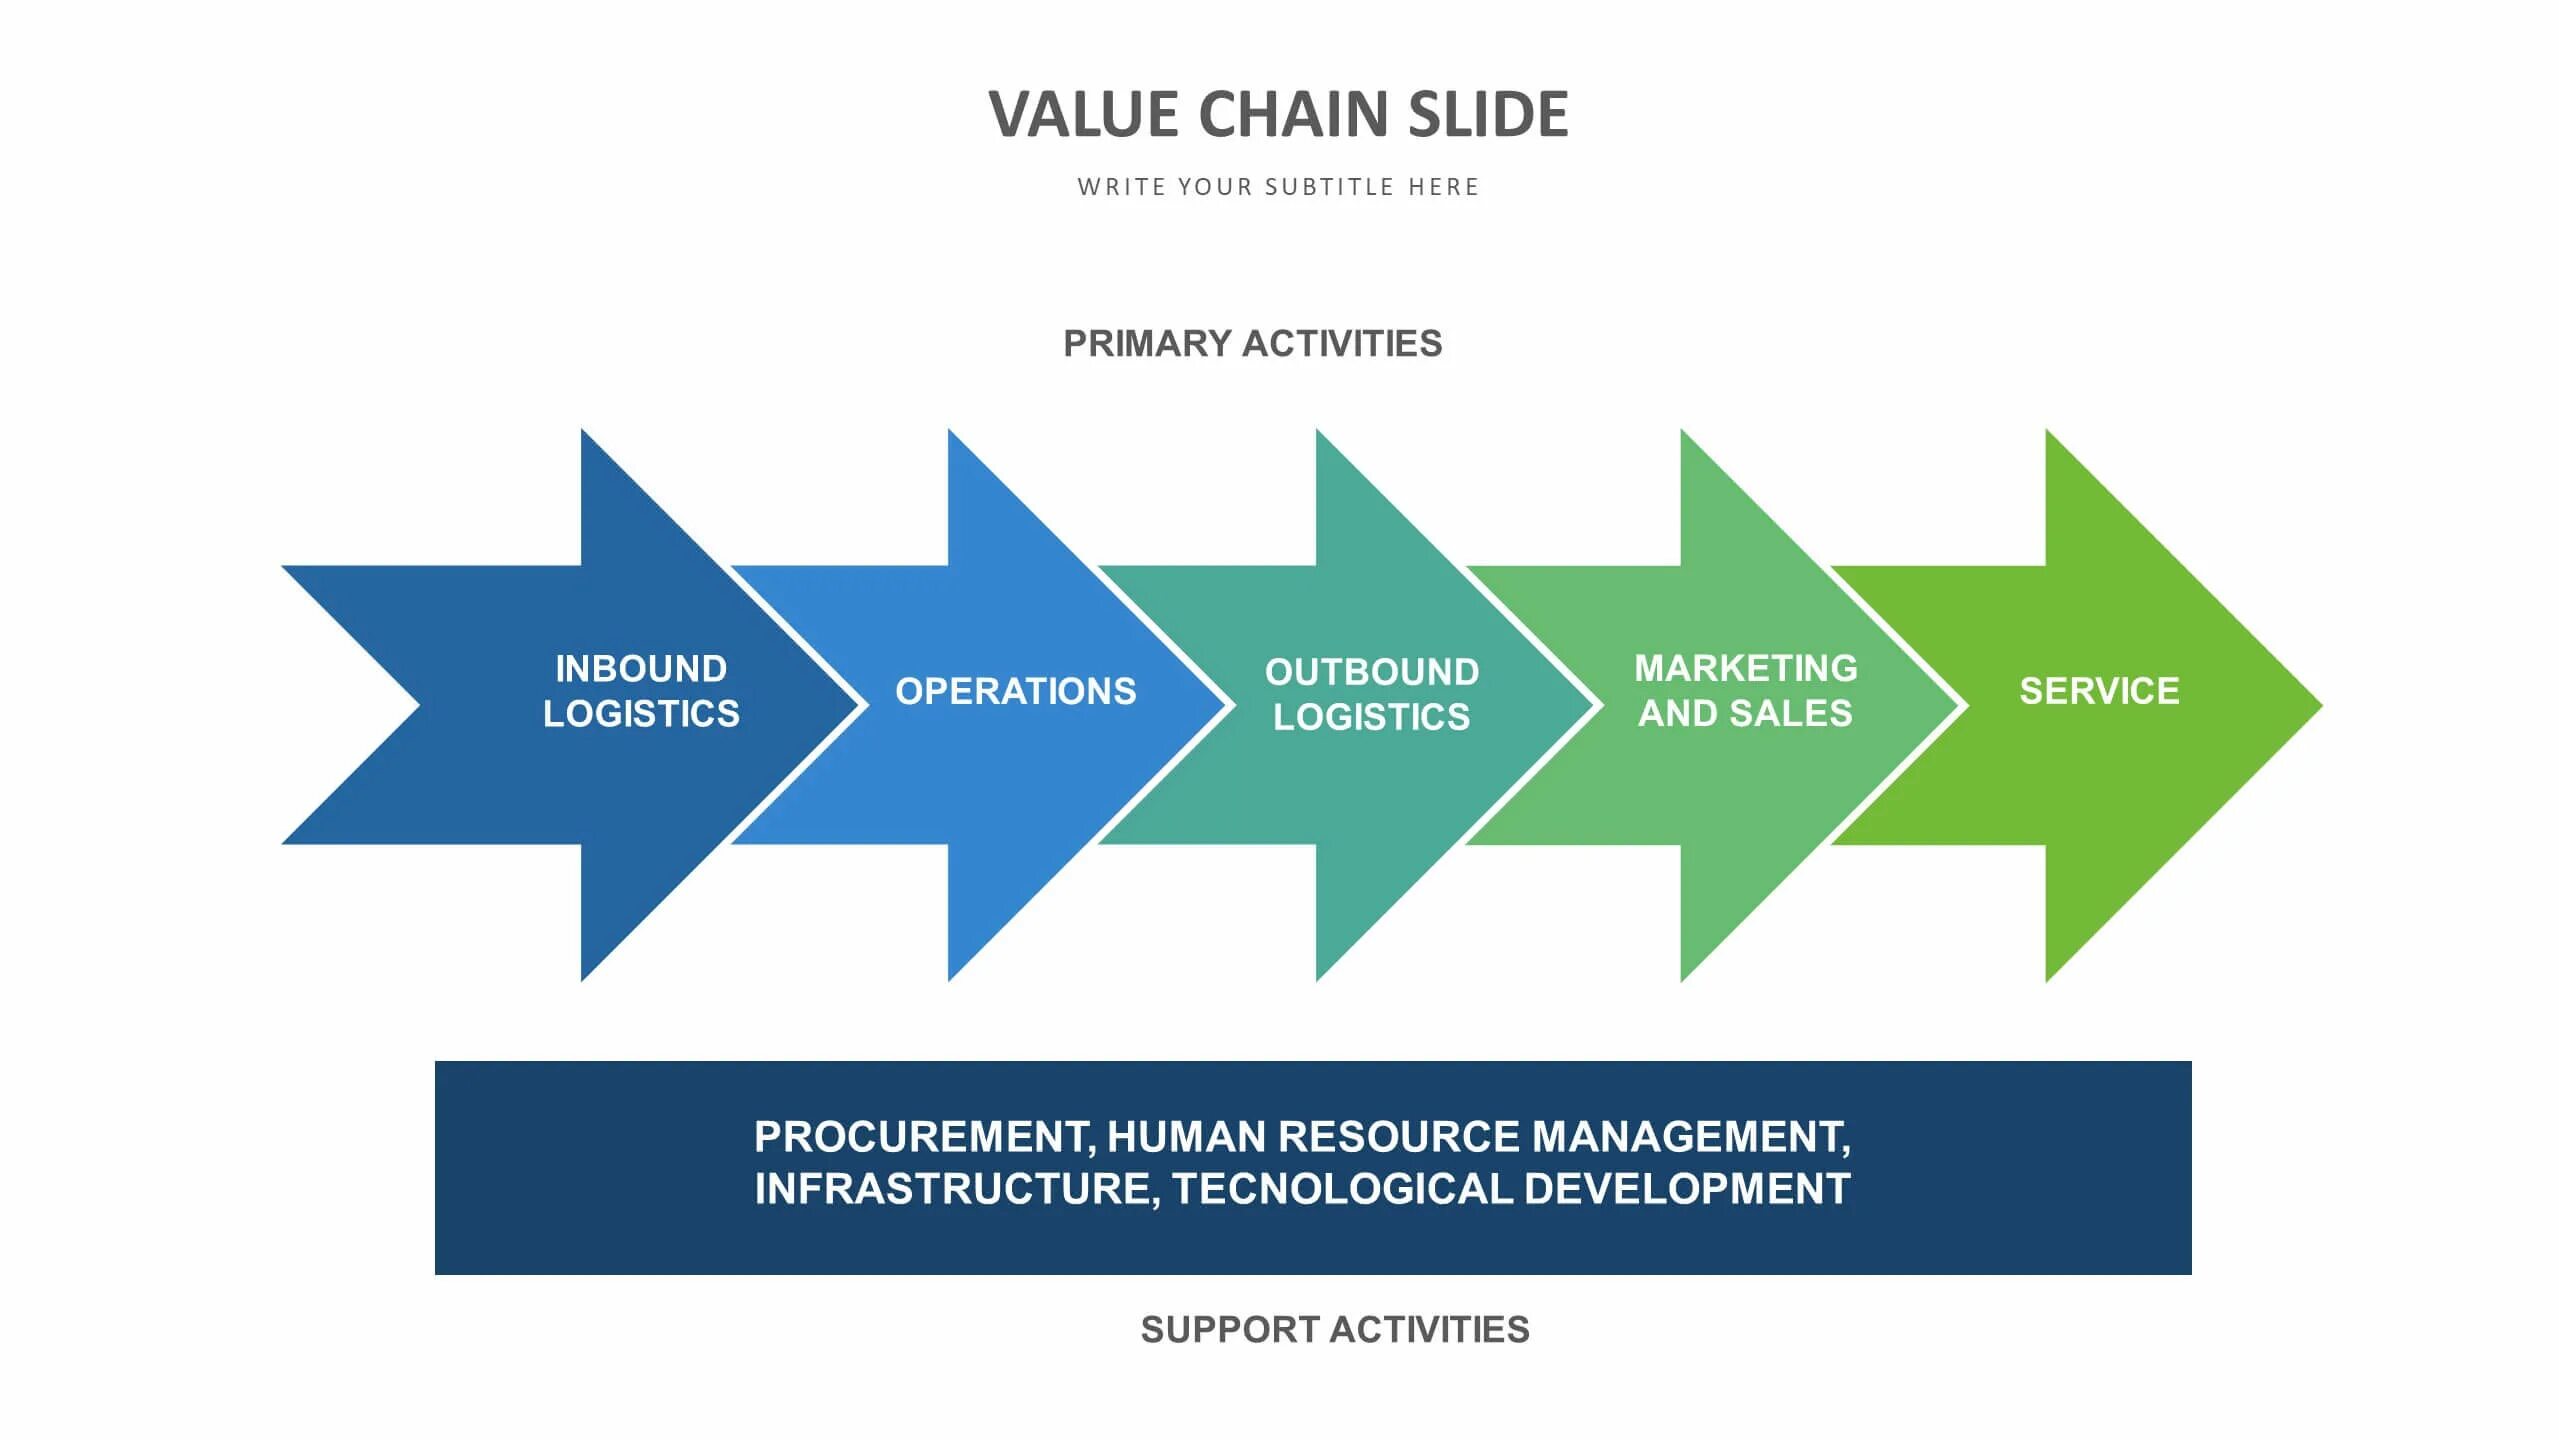 Value added Chain. Value Chain сертификация. Нотация value-added Chain diagram. Value Chain Analysis Template.